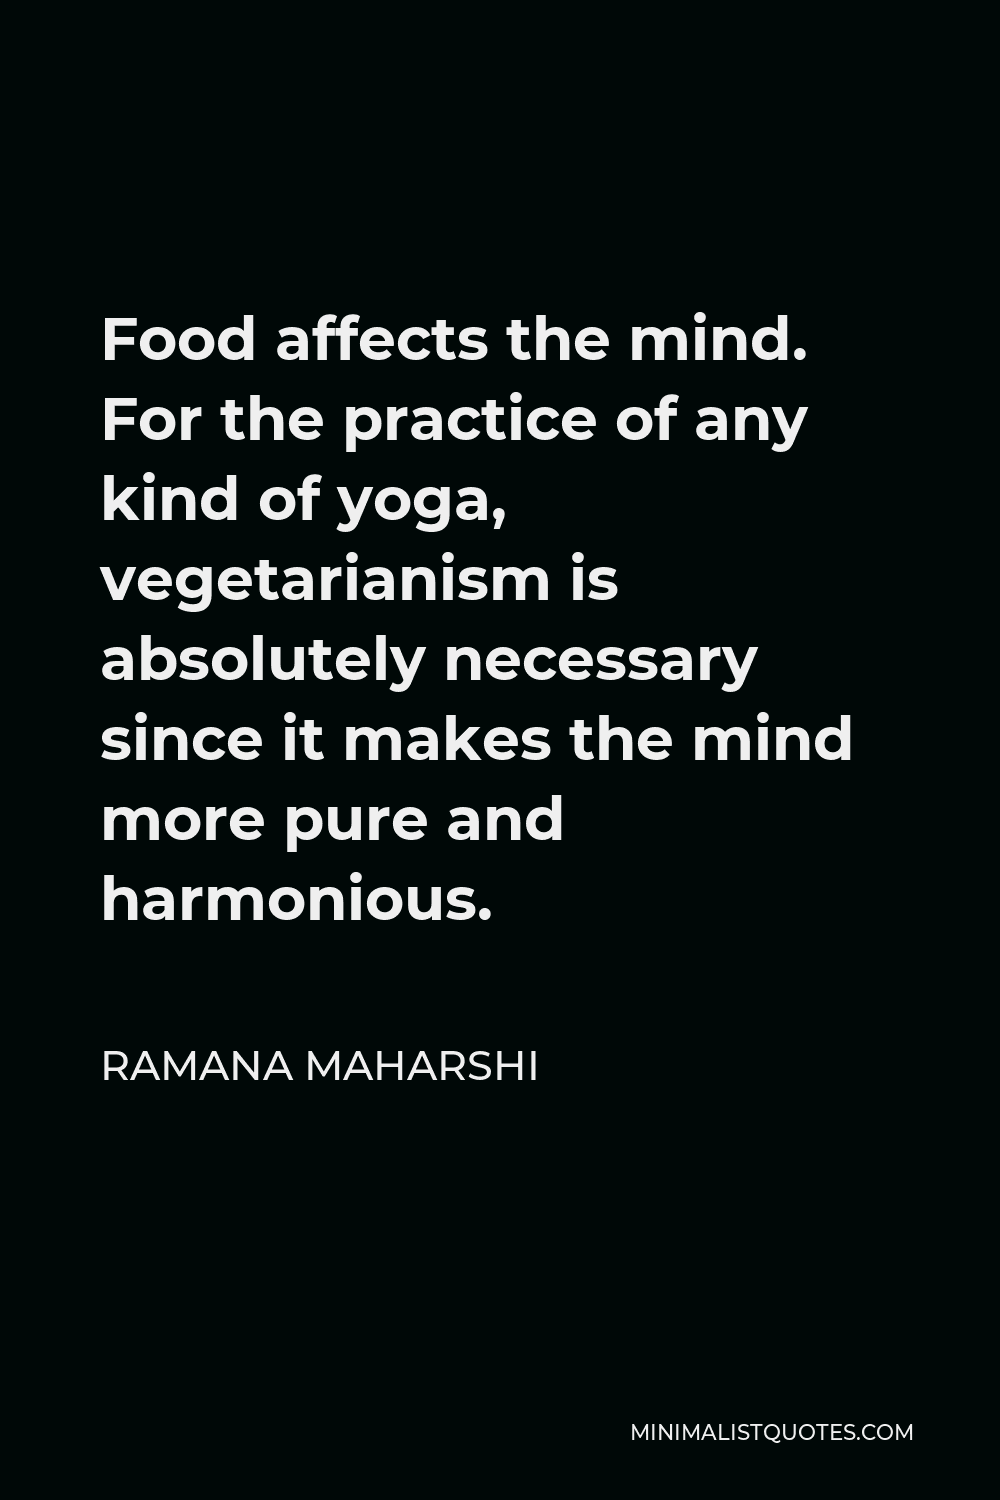 Ramana Maharshi Quote - Food affects the mind. For the practice of any kind of yoga, vegetarianism is absolutely necessary since it makes the mind more pure and harmonious.